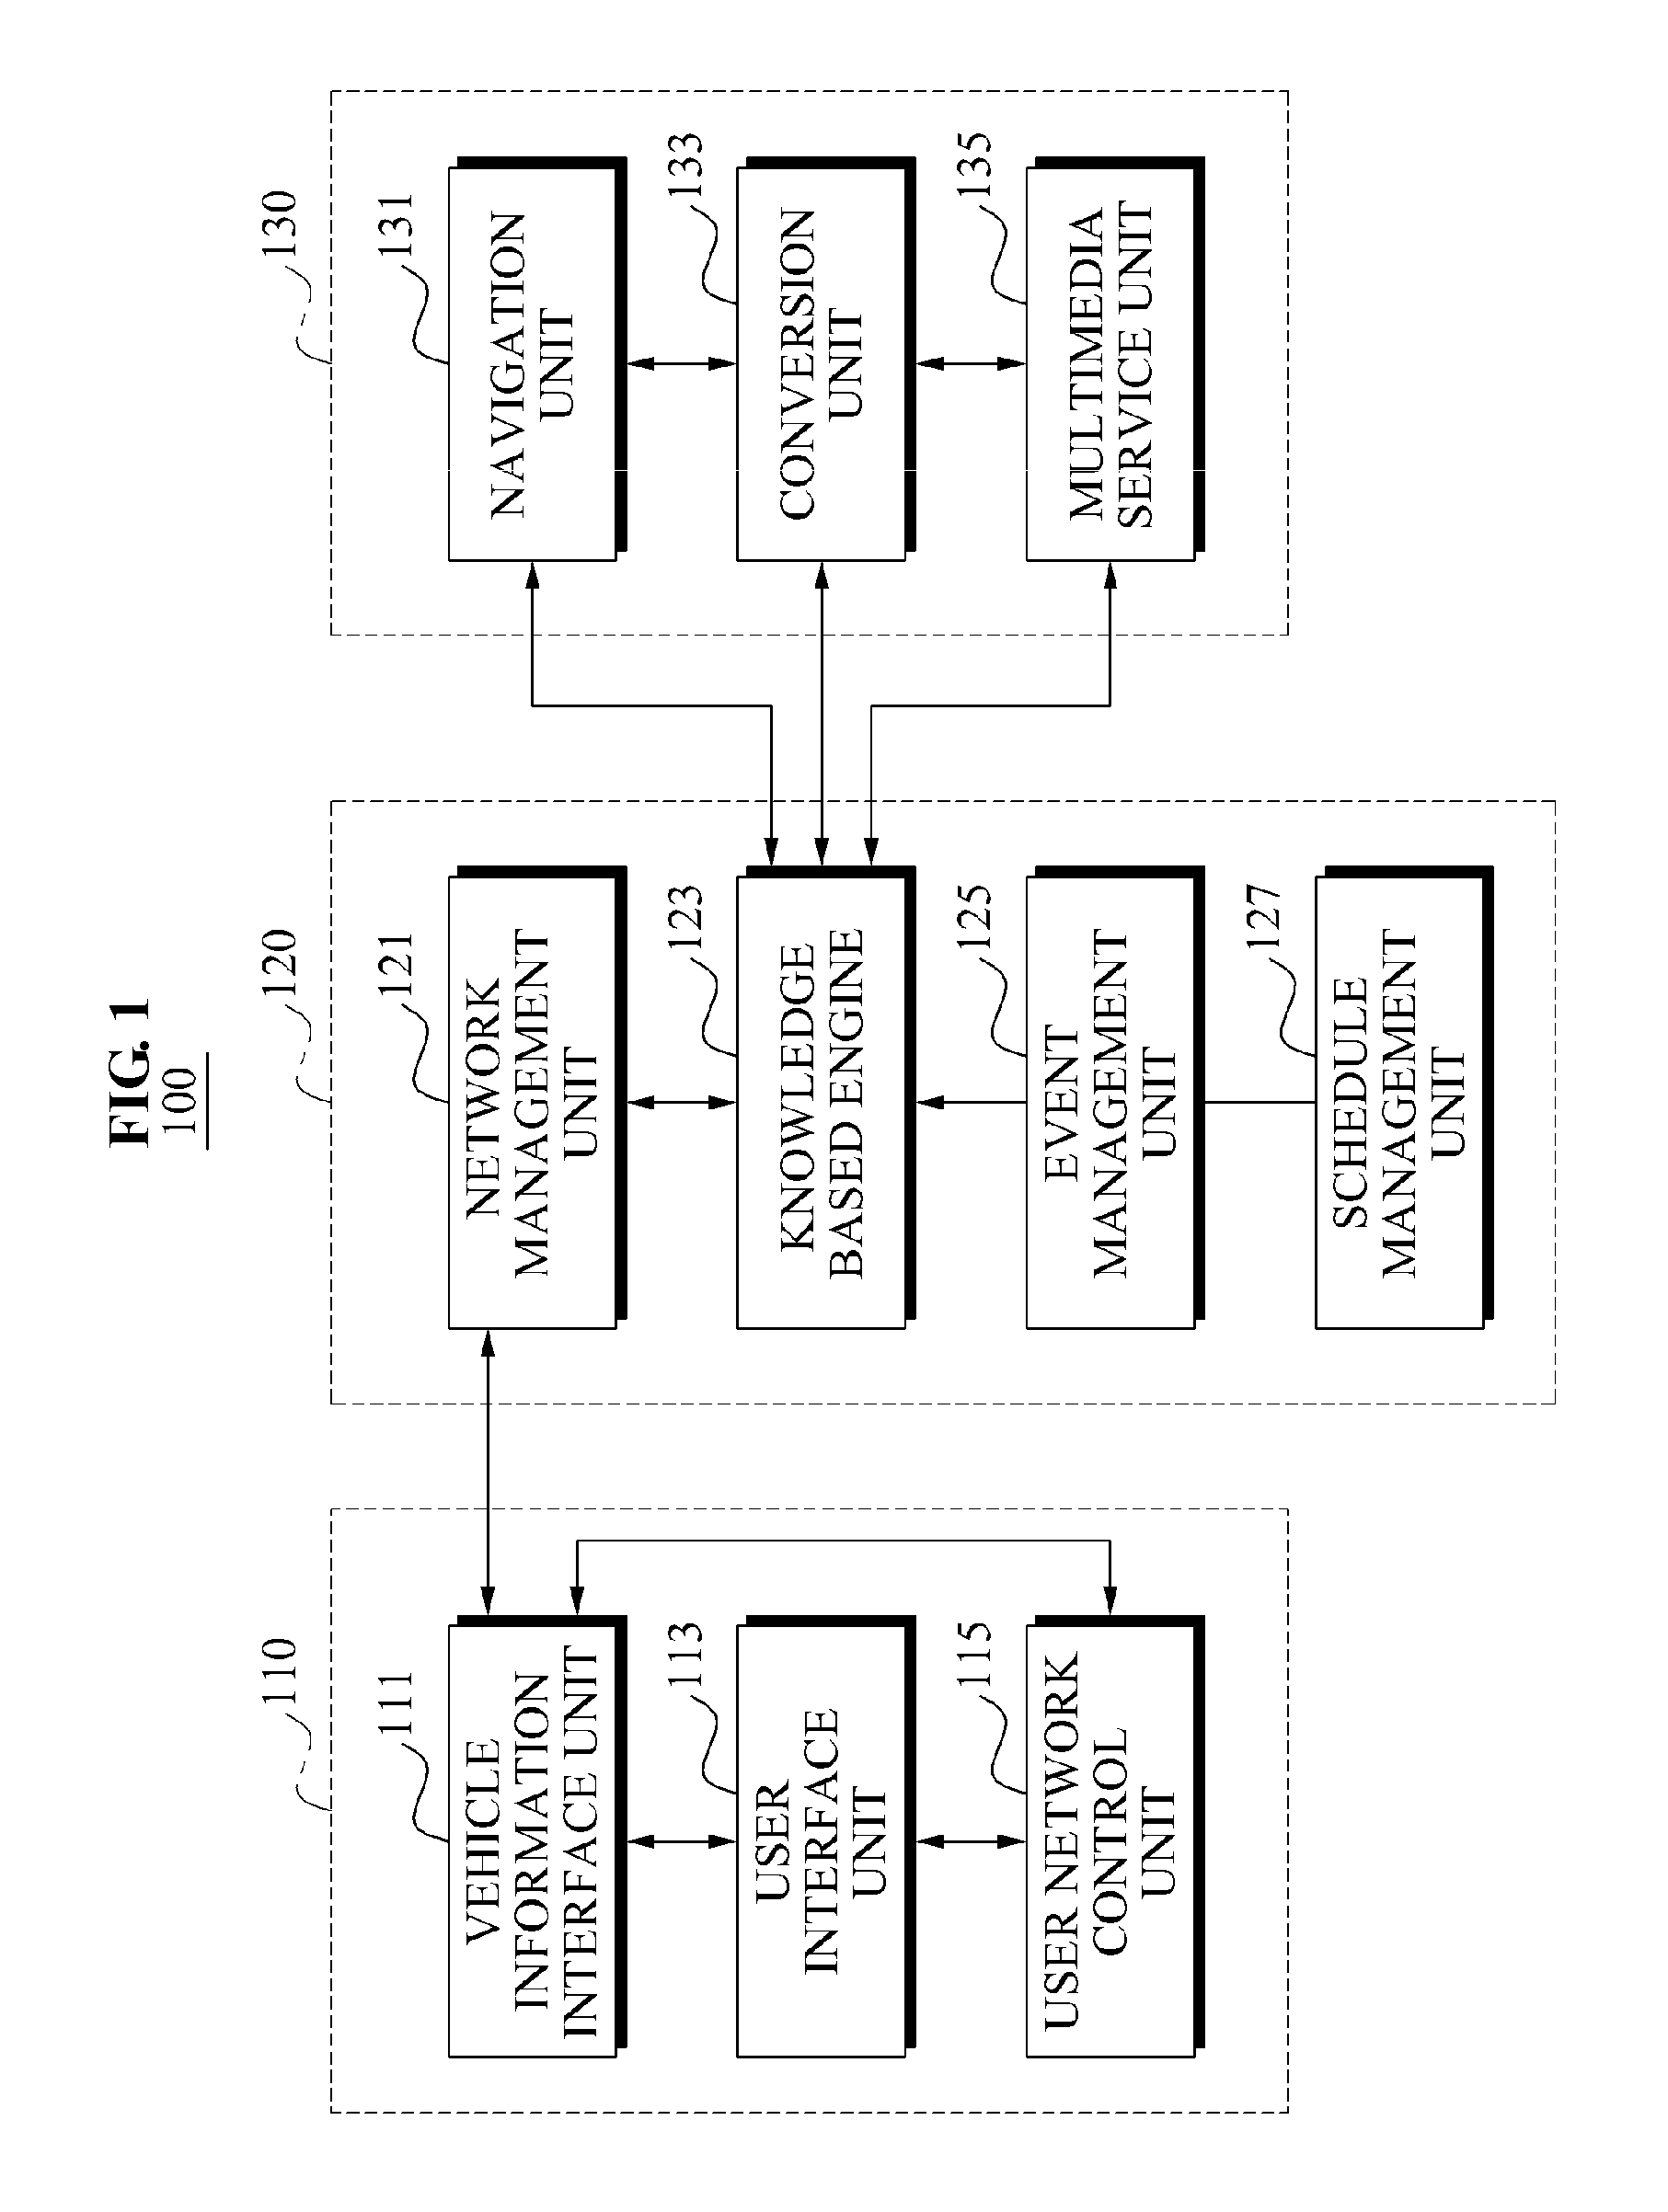 System of integrated telematics service and method of controlling the system